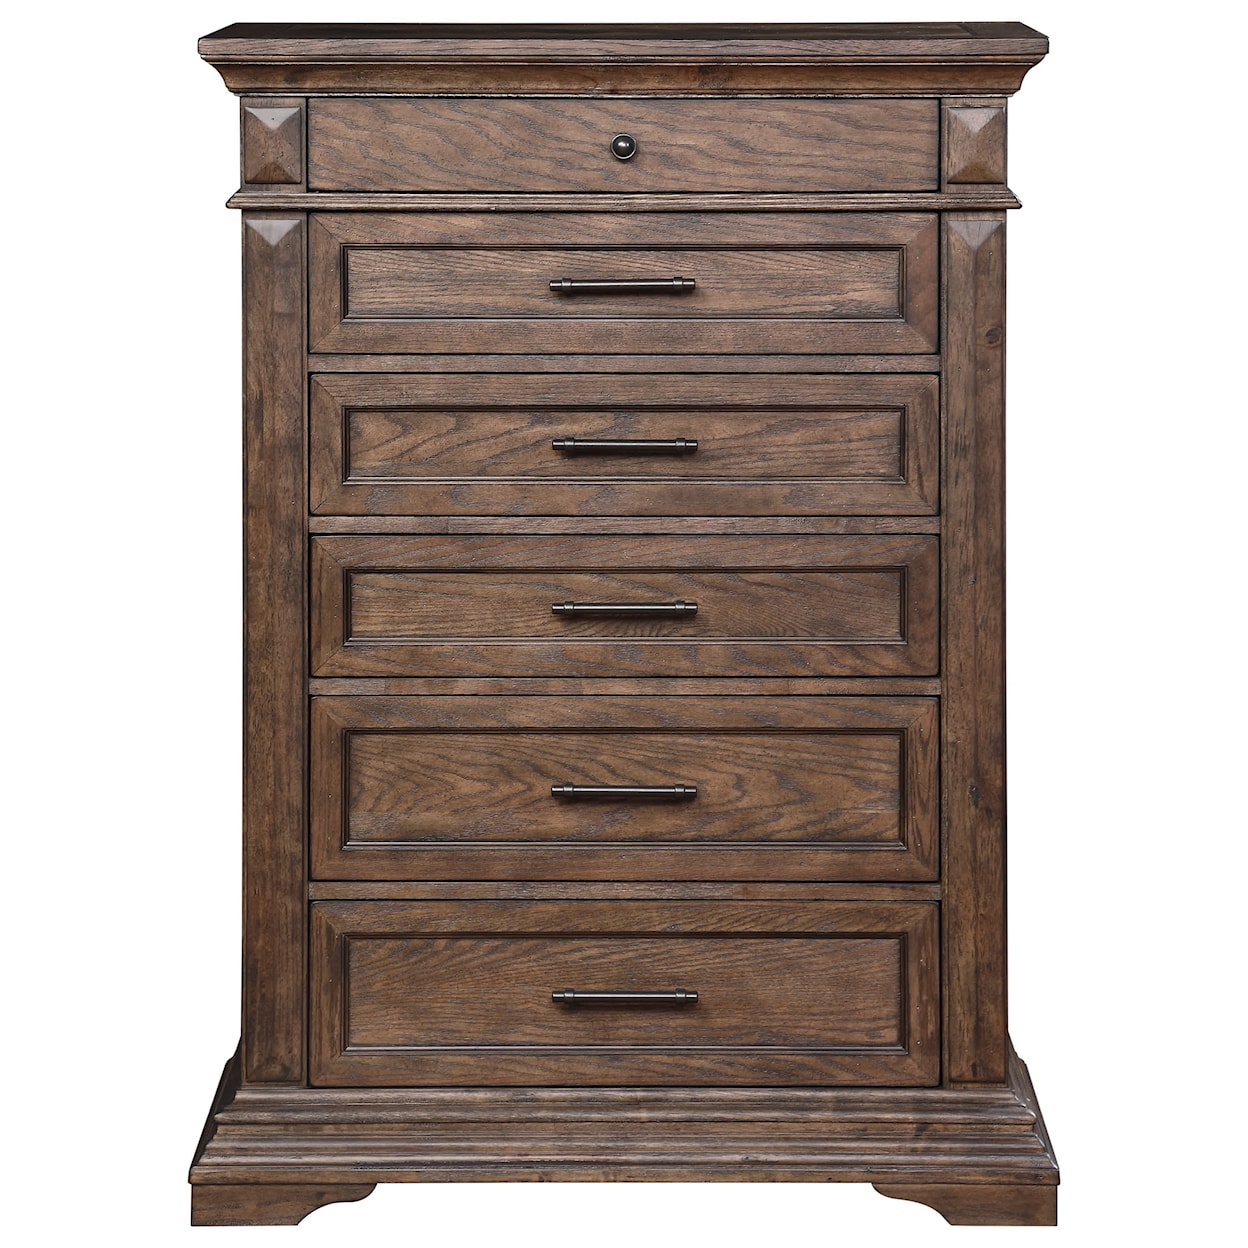 New Classic Mar Vista Chest of Drawers